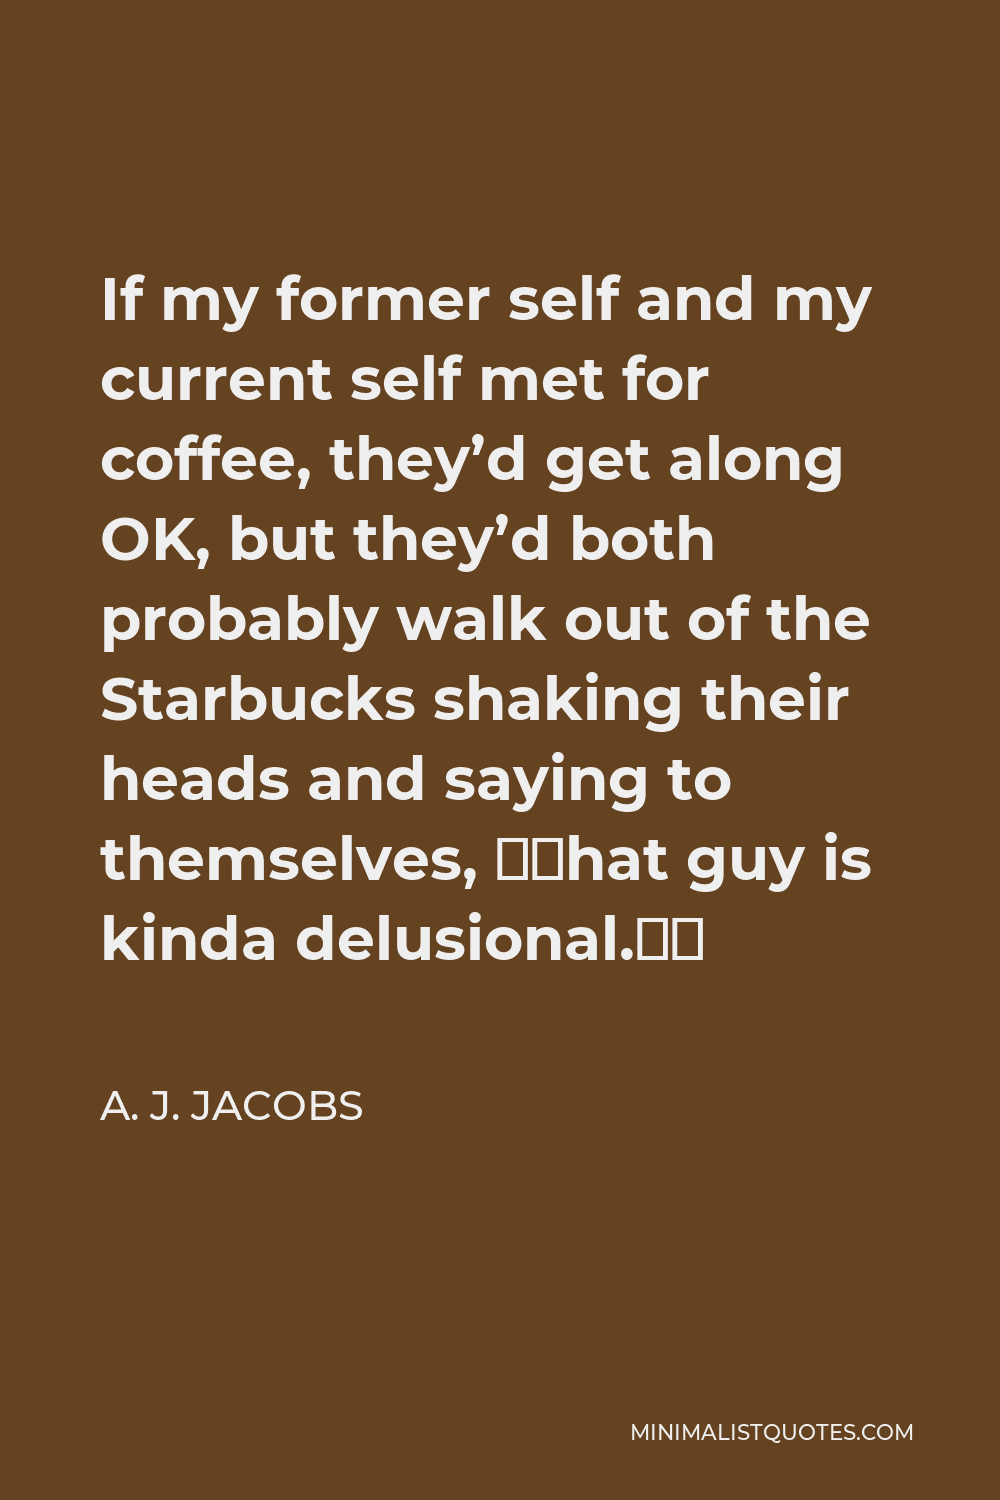 A. J. Jacobs Quote - If my former self and my current self met for coffee, they’d get along OK, but they’d both probably walk out of the Starbucks shaking their heads and saying to themselves, “That guy is kinda delusional.”